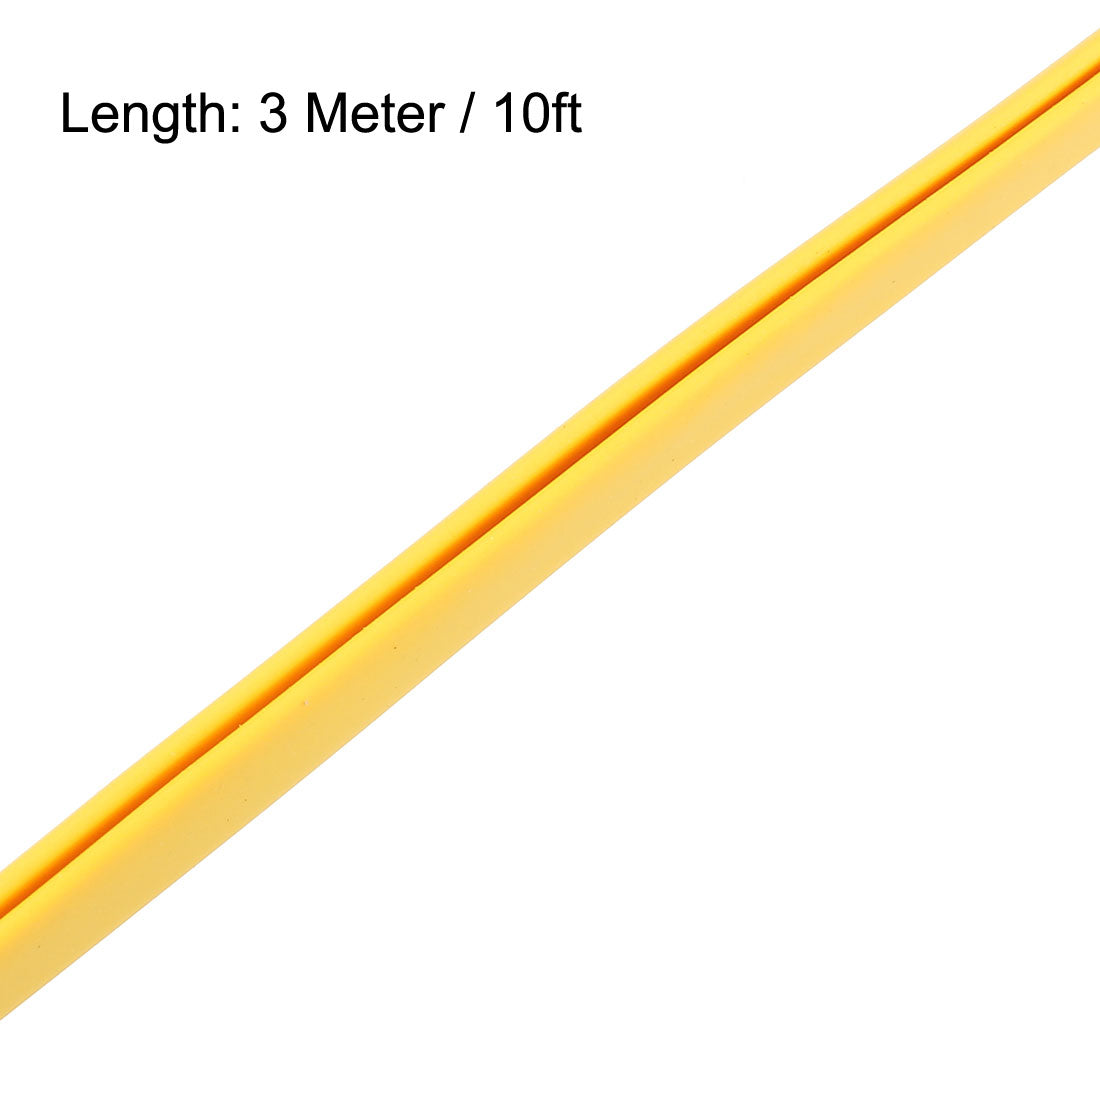 uxcell Uxcell Edge Trim U Seal Yellow Rubber Fits 1/256"- 3/64" Edge 10 Feet Length